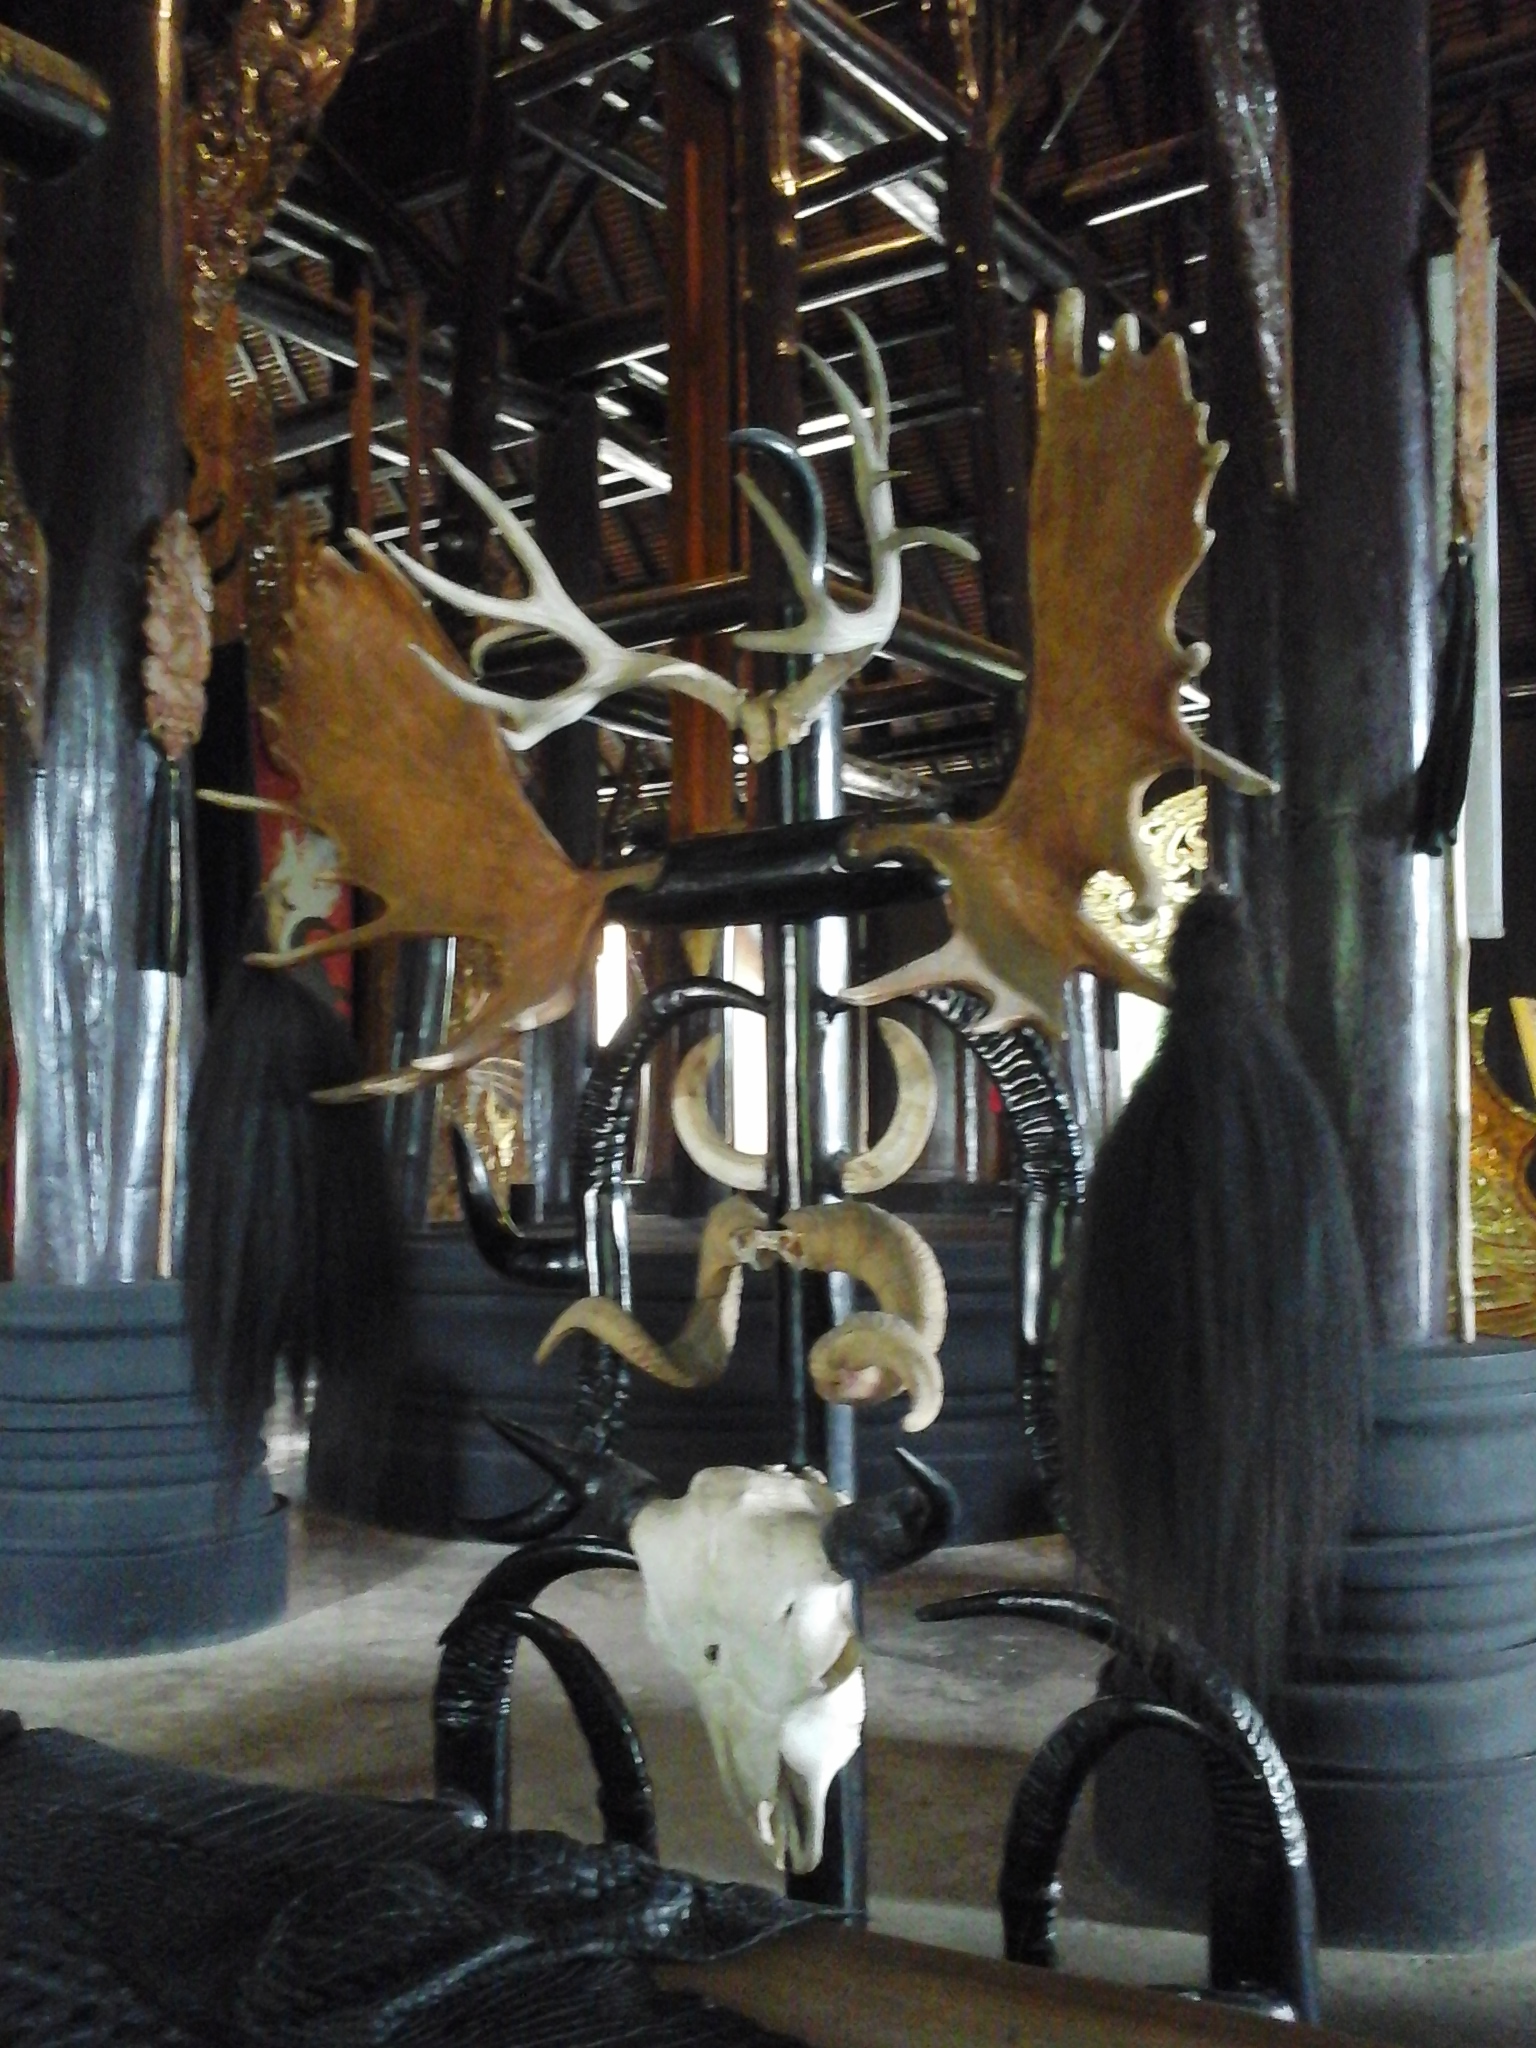 Another view of the horned chairs with skull at Baan Daam